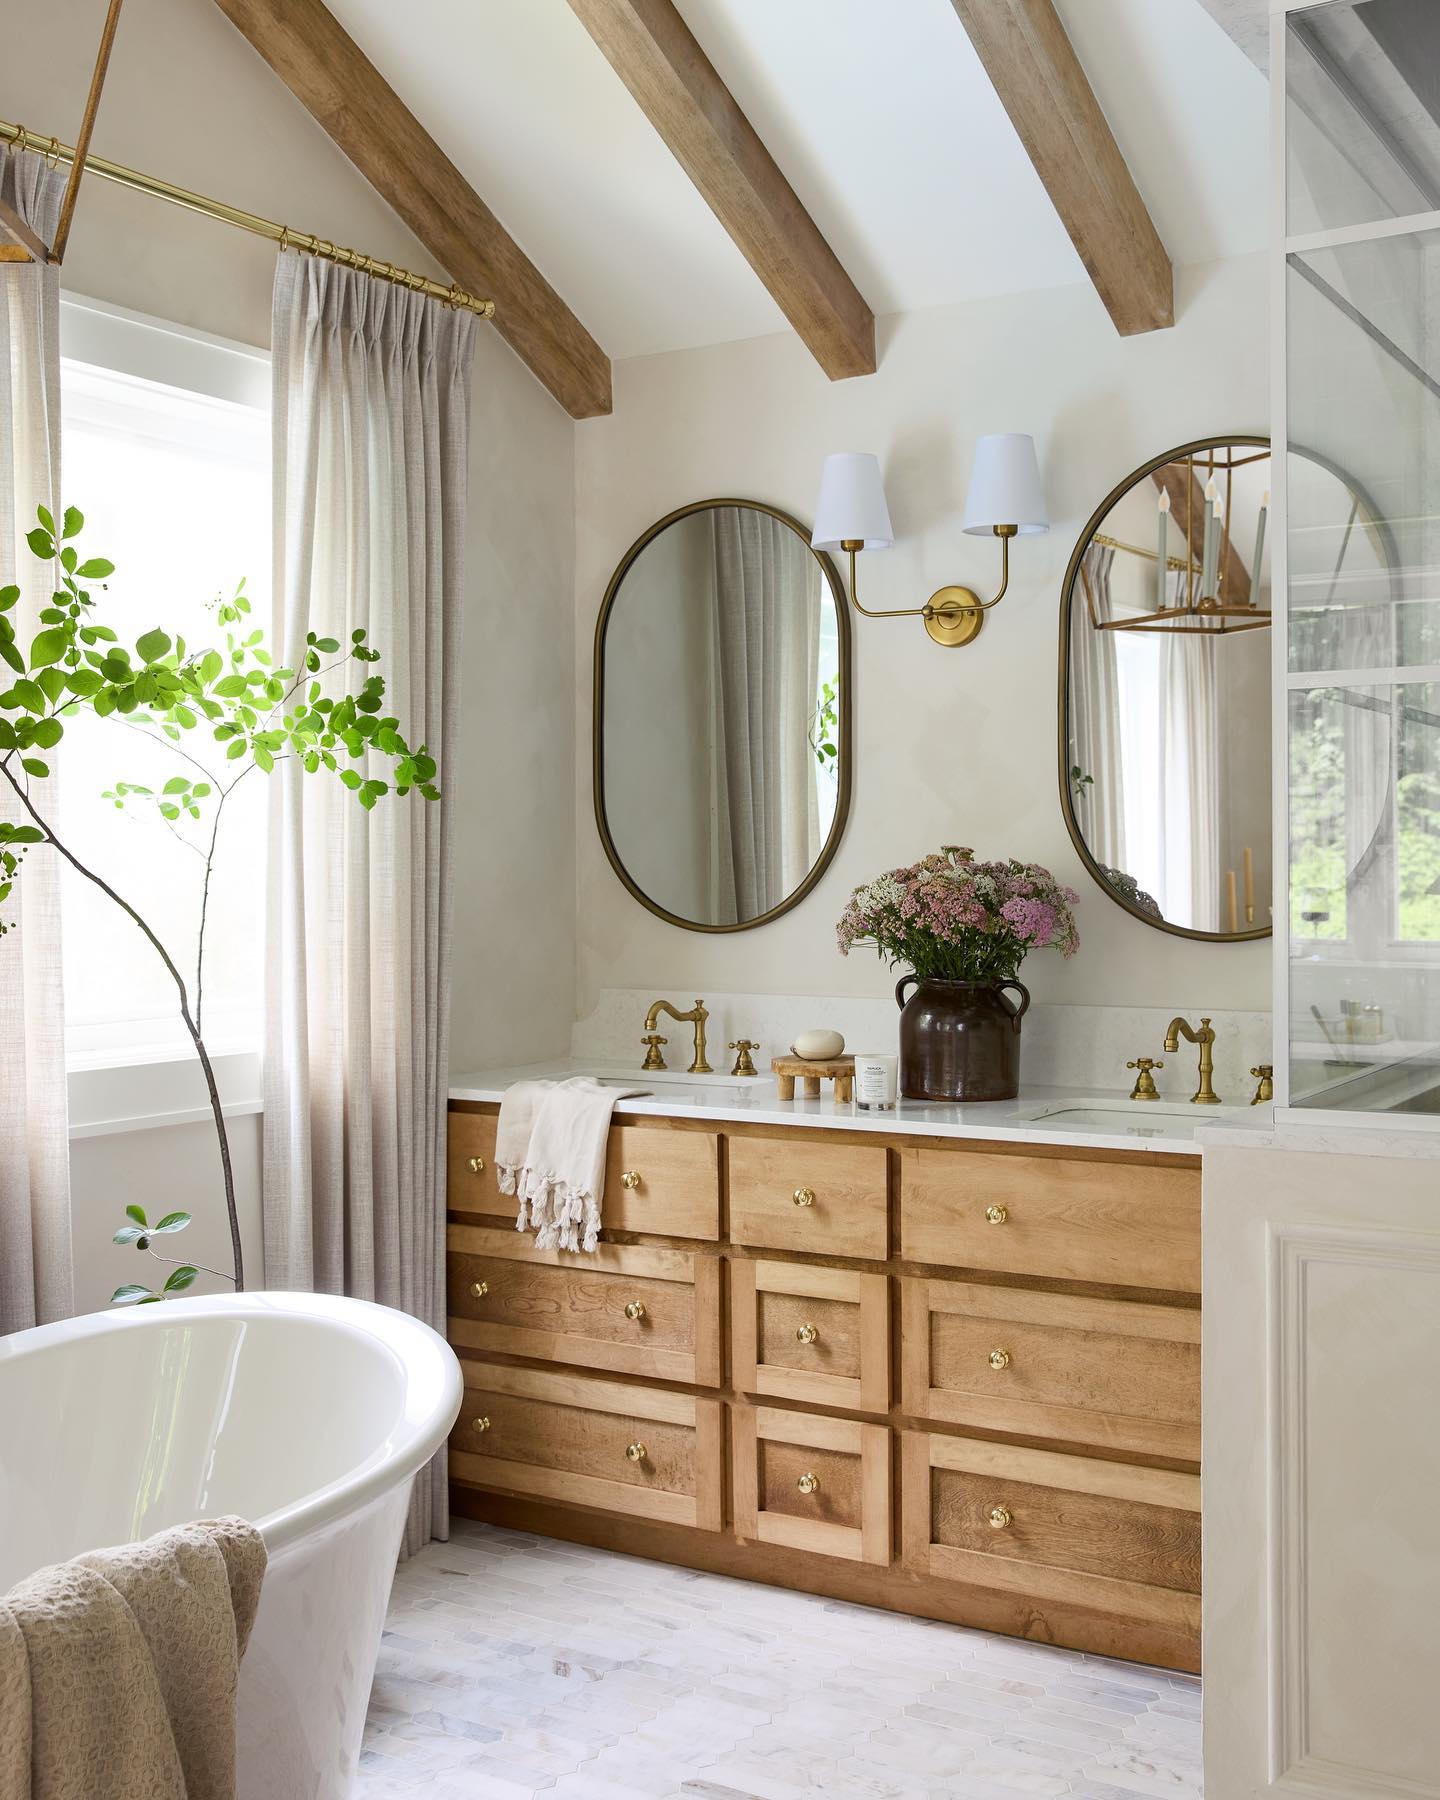 Bathroom Makeovers: Before and After Transformations That Will Leave You Speechless